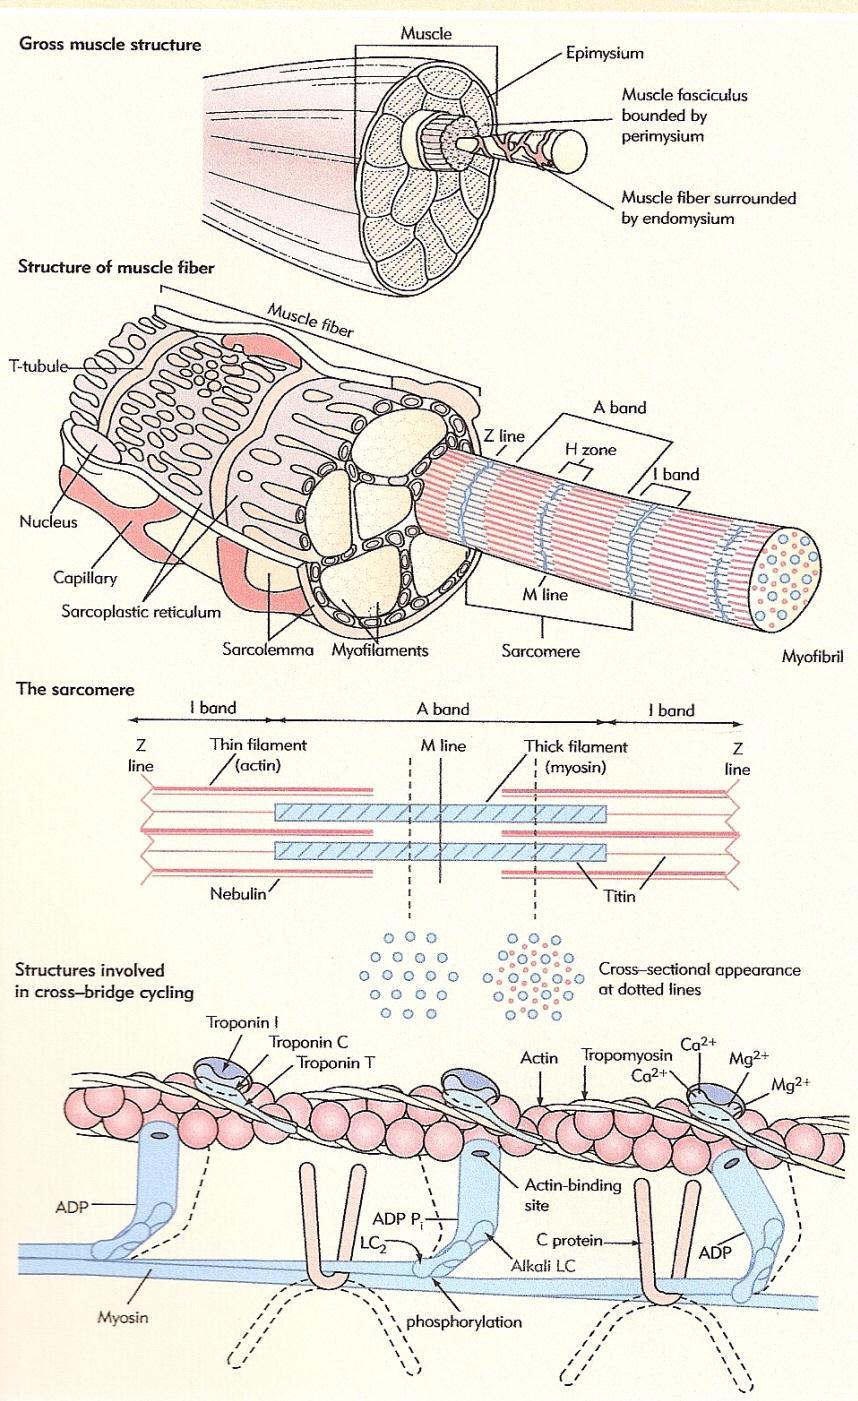 Muscle cells are long, cylindrical structures that are bound by a plasma membrane the sarcolemma.